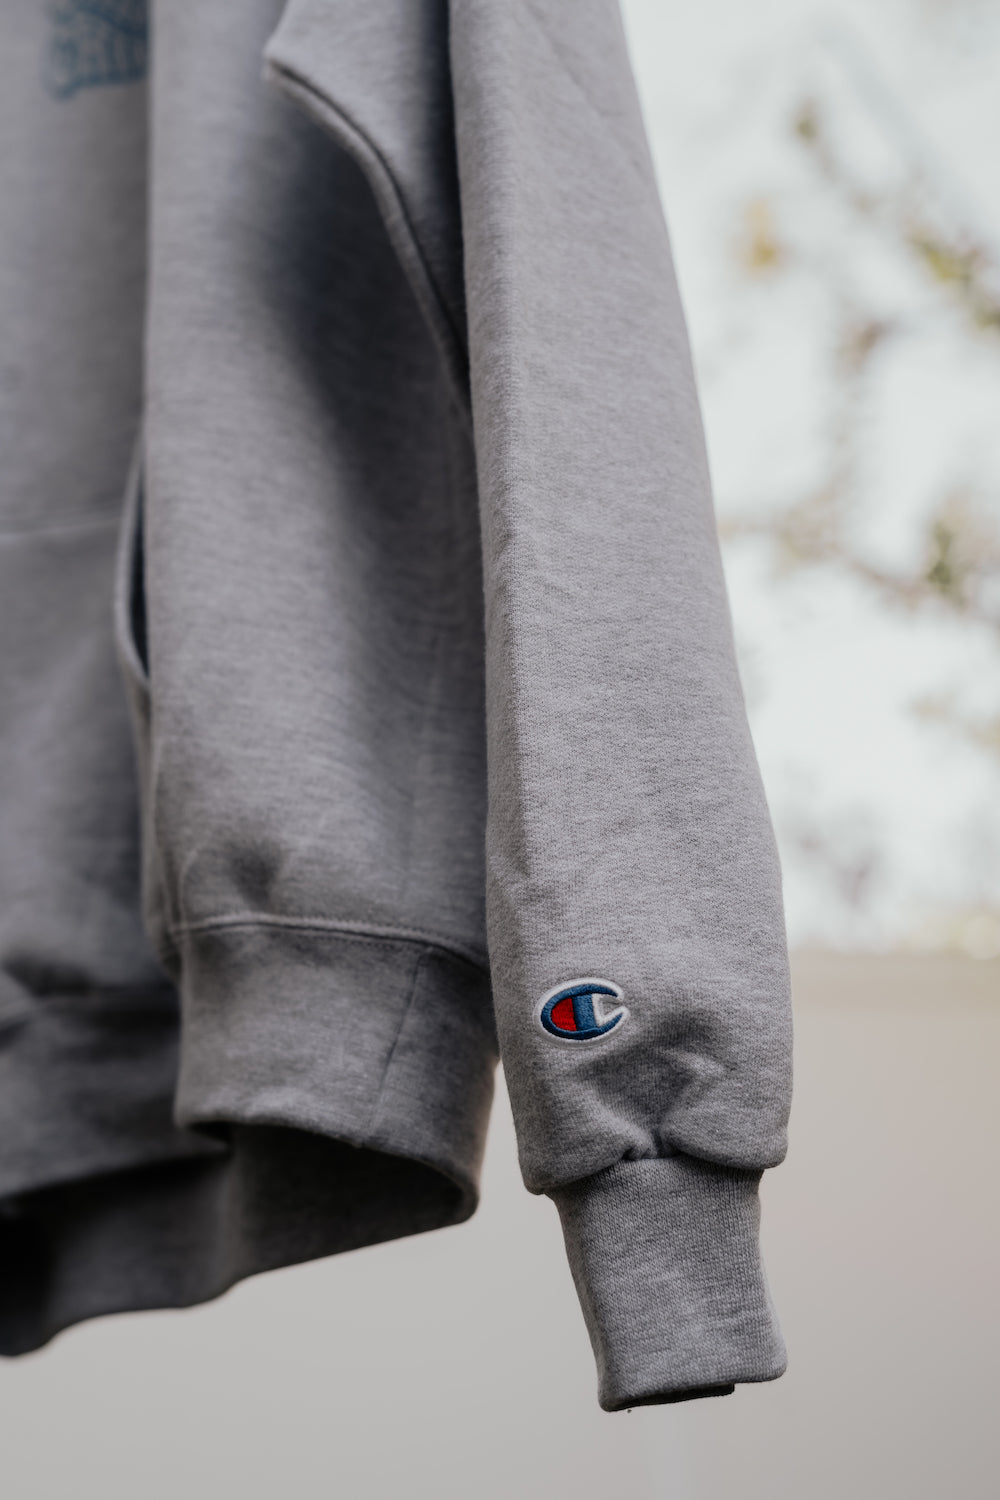 – HOODIE BAND CHIEF AUTHENTIC ECO® (GREY) X CHAMPION CHIEF